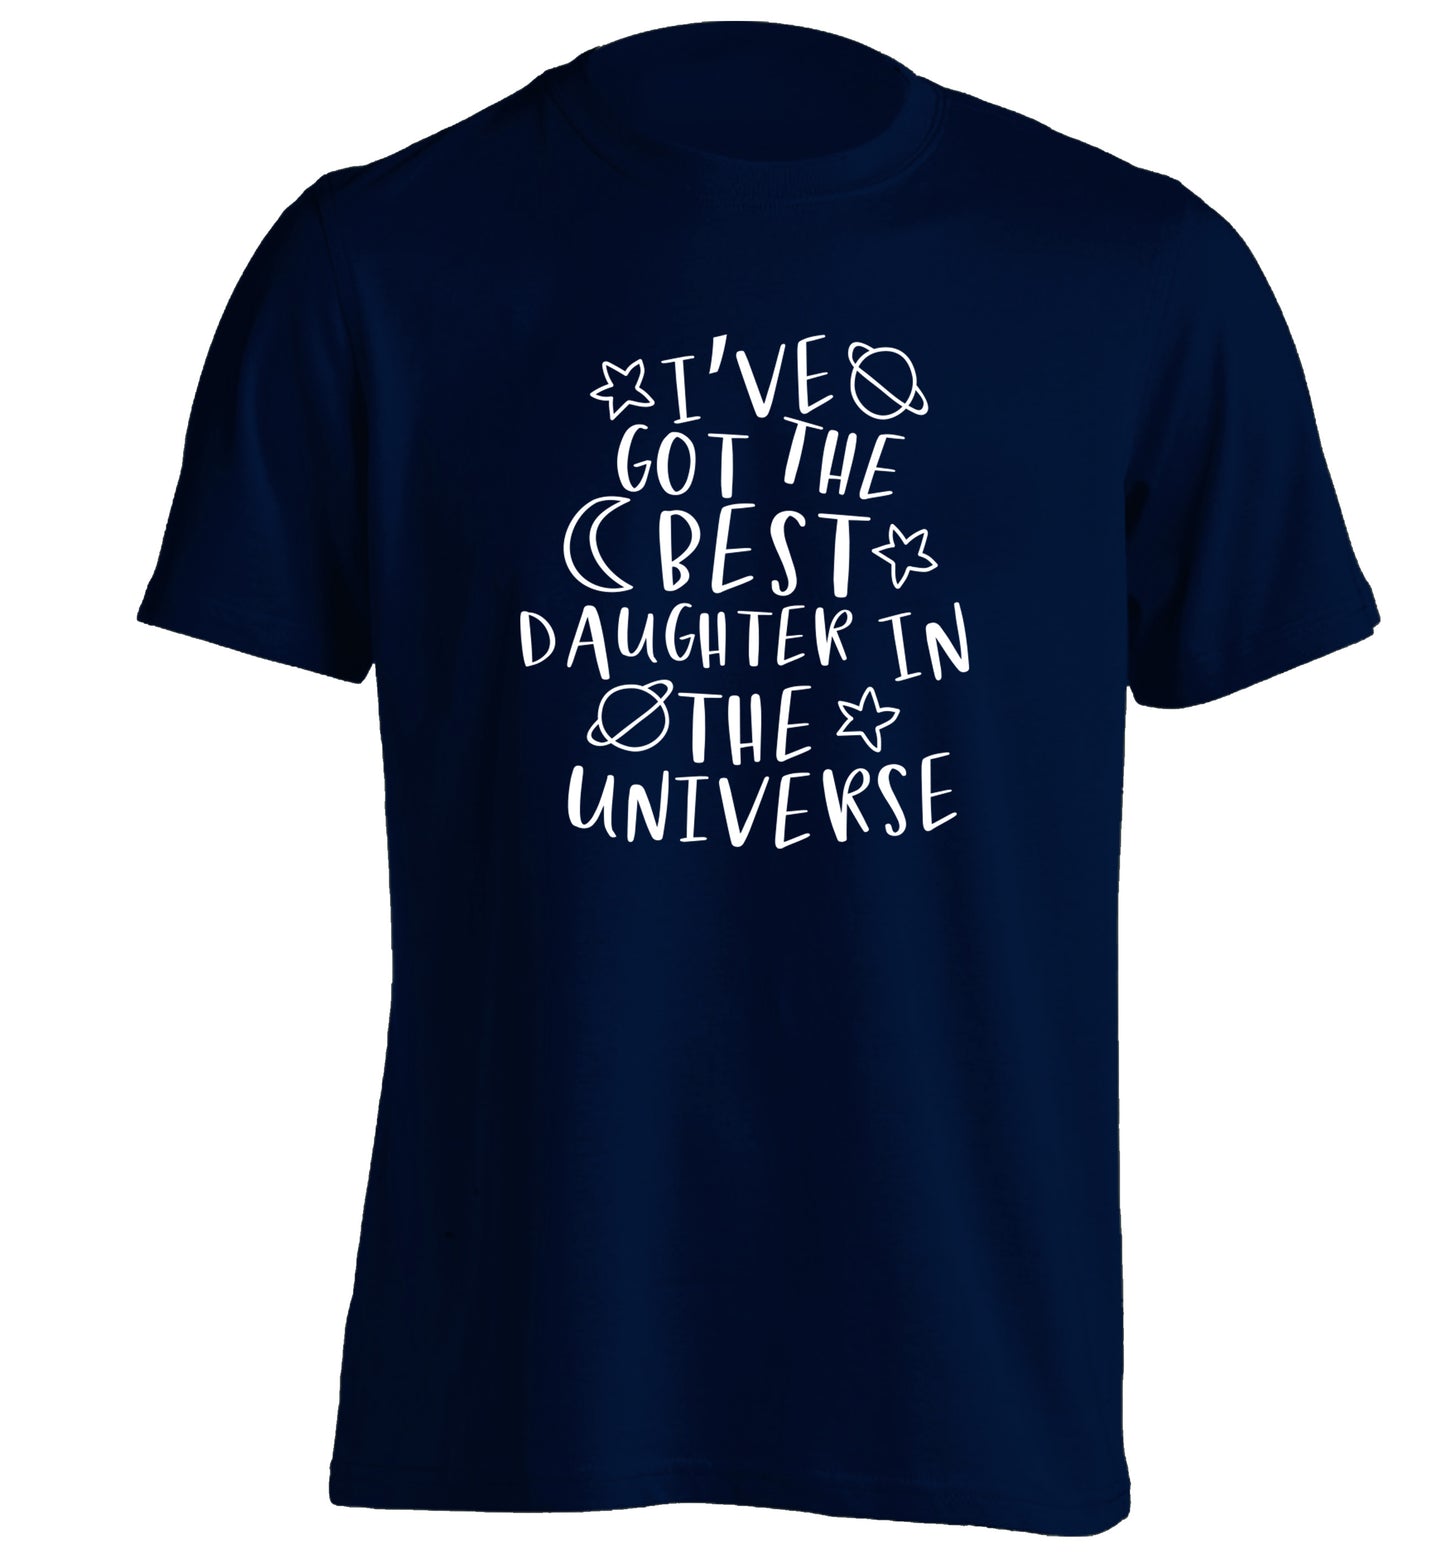 I've got the best daughter in the universe adults unisex navy Tshirt 2XL